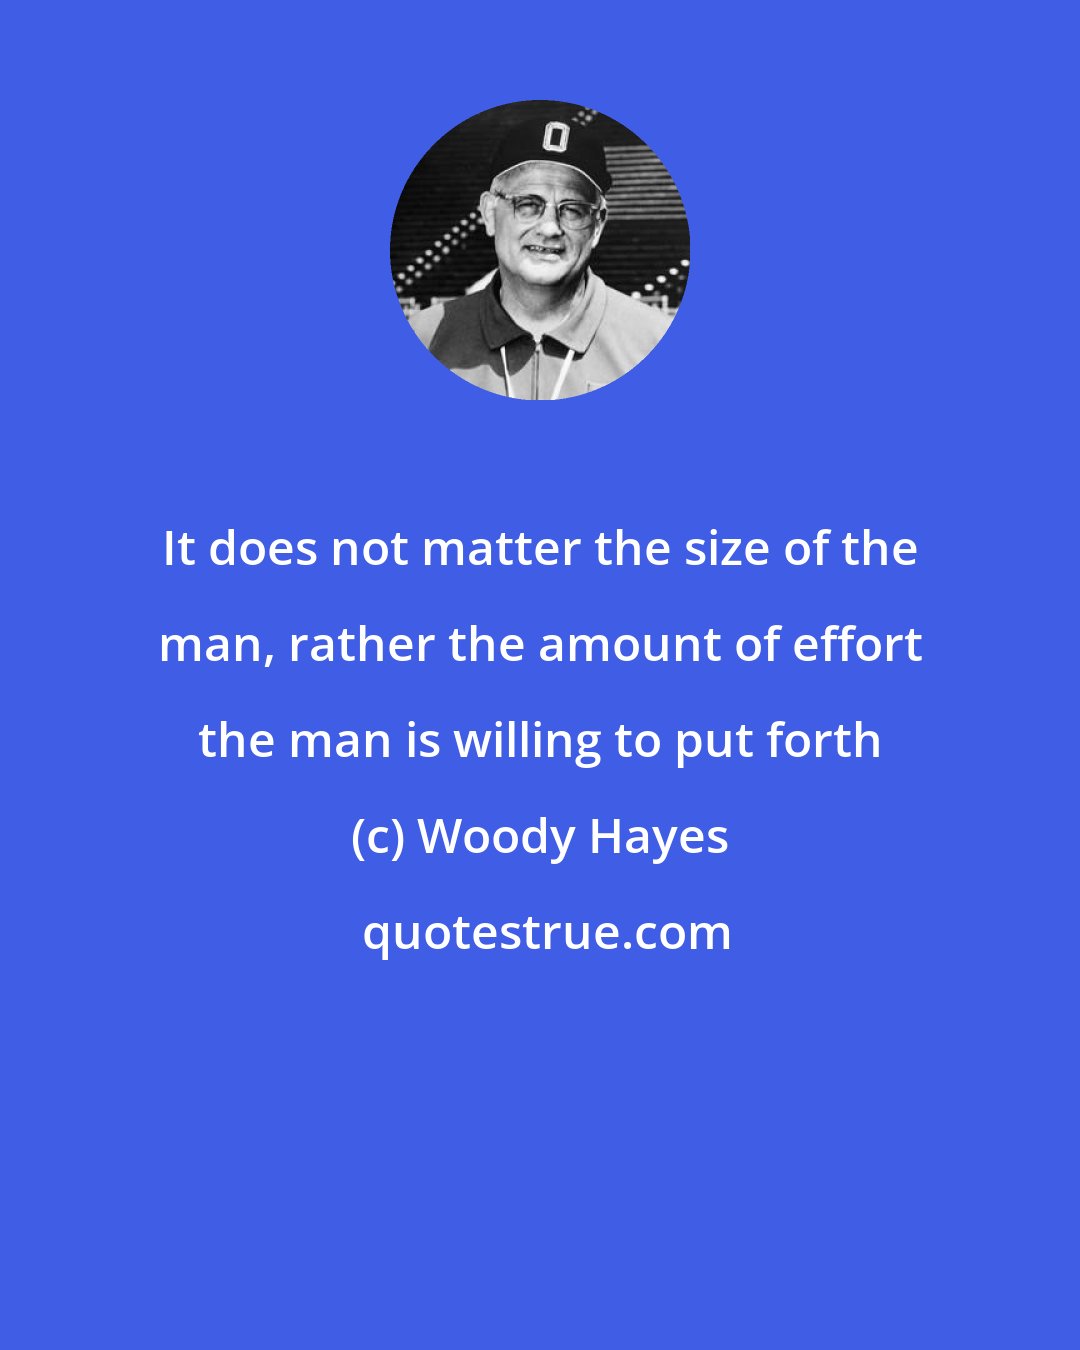 Woody Hayes: It does not matter the size of the man, rather the amount of effort the man is willing to put forth